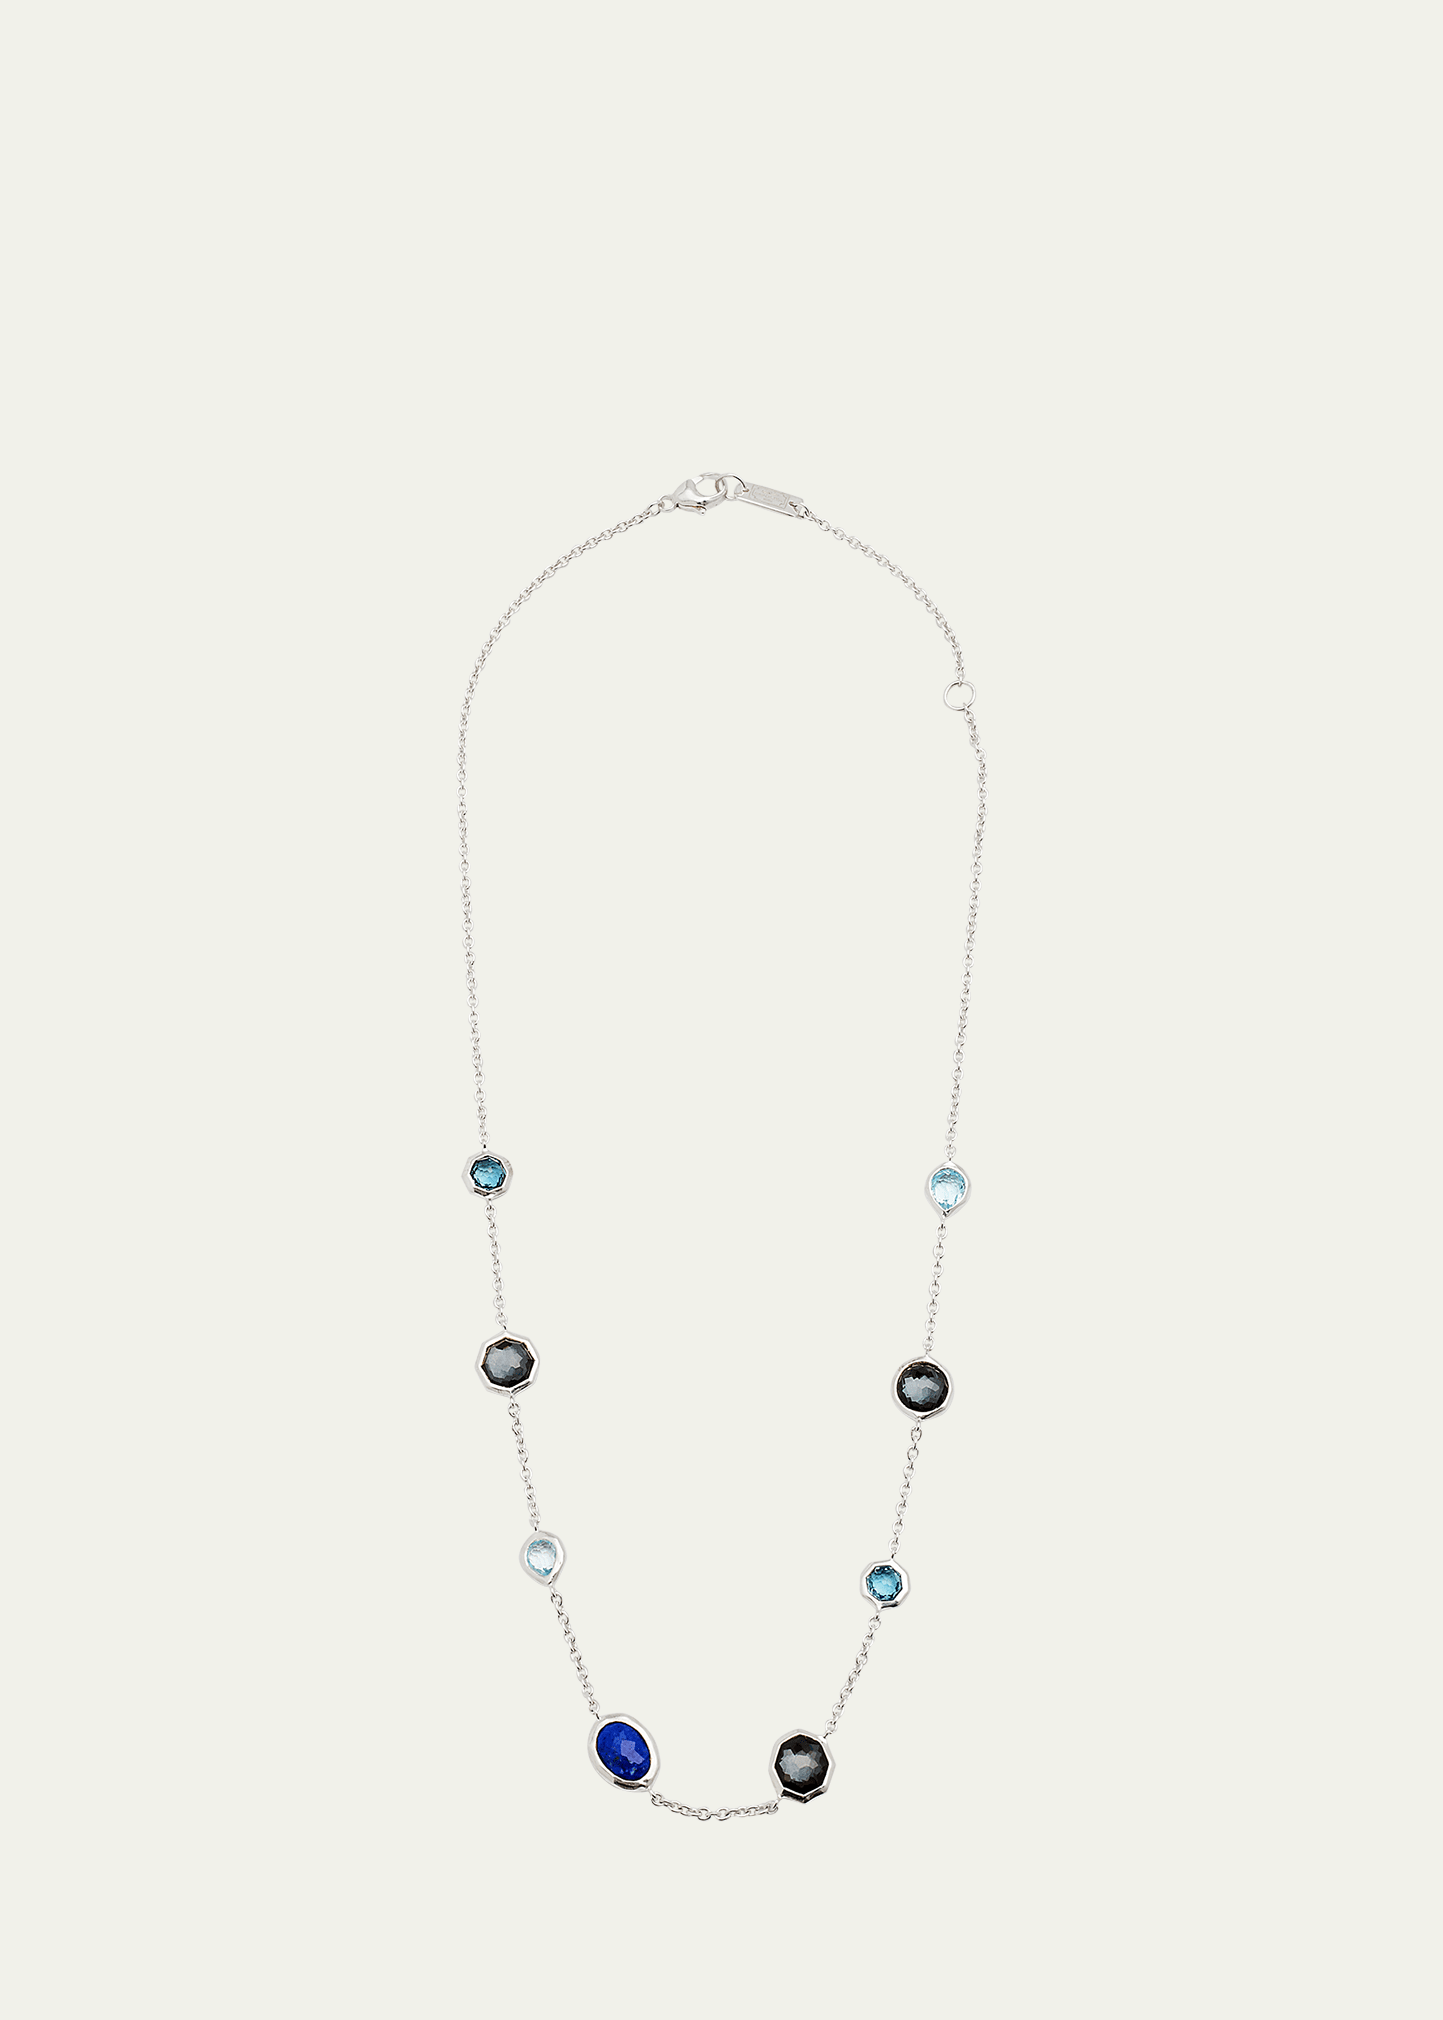 Ippolita Mini Station Necklace in Sterling Silver